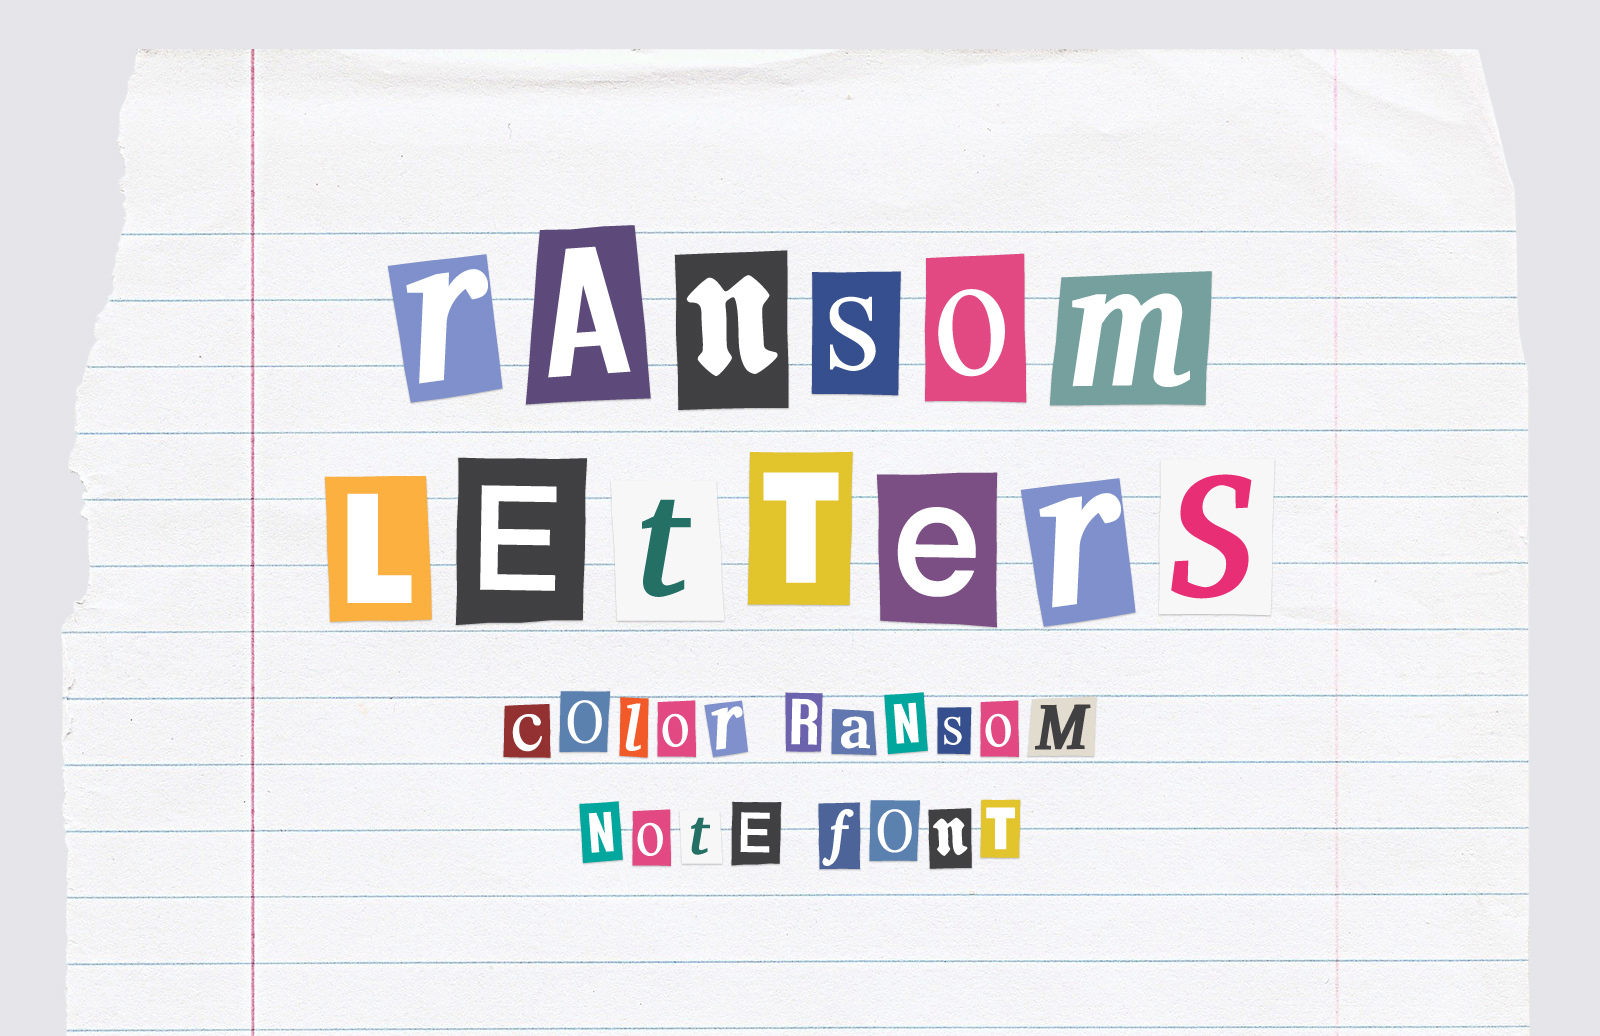 Ransom Letters Color Ransom Note Font — Medialoot